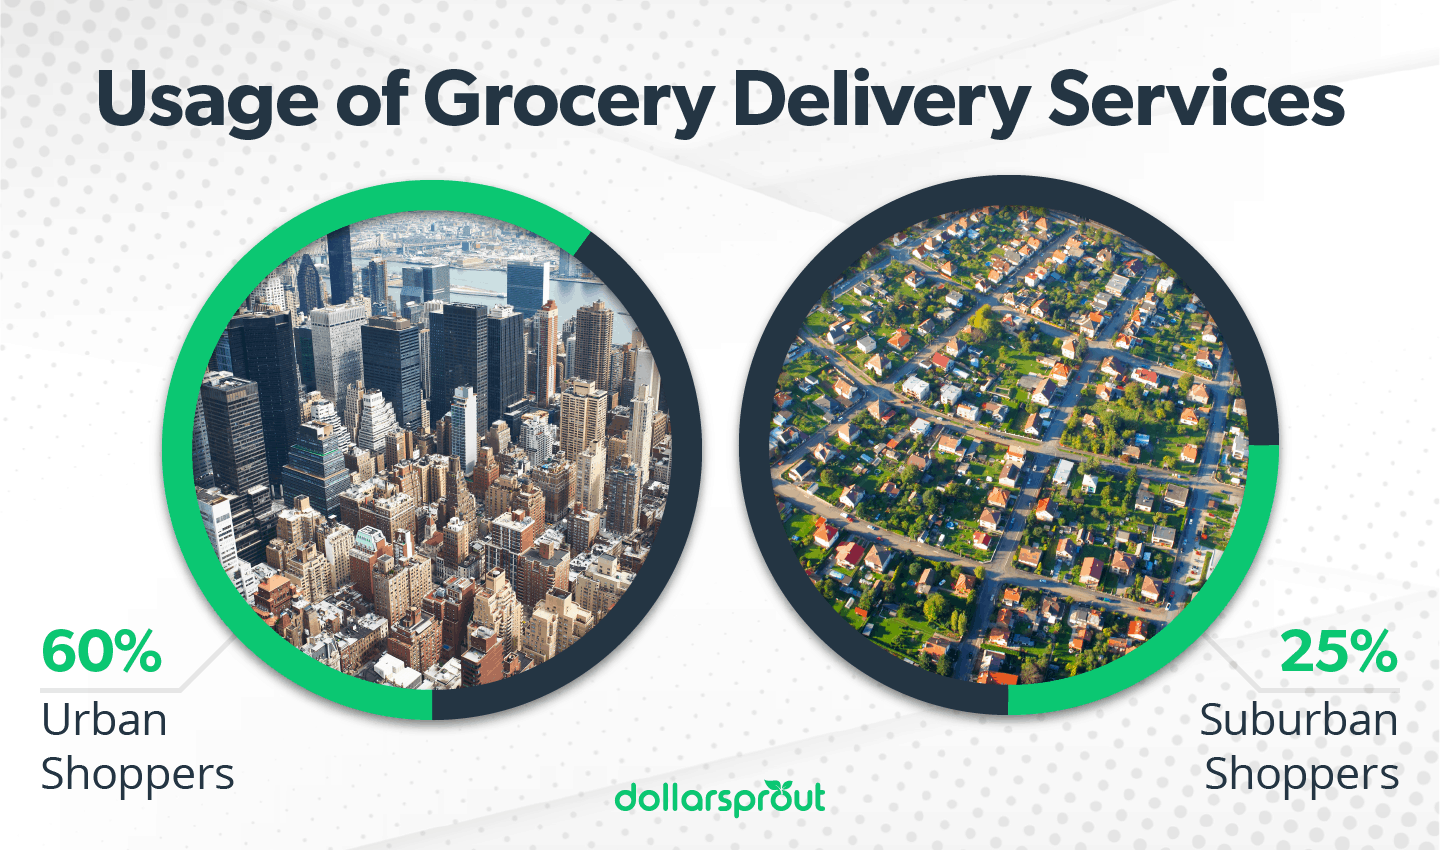 Usage of Grocery Delivery Services Urban vs Suburban